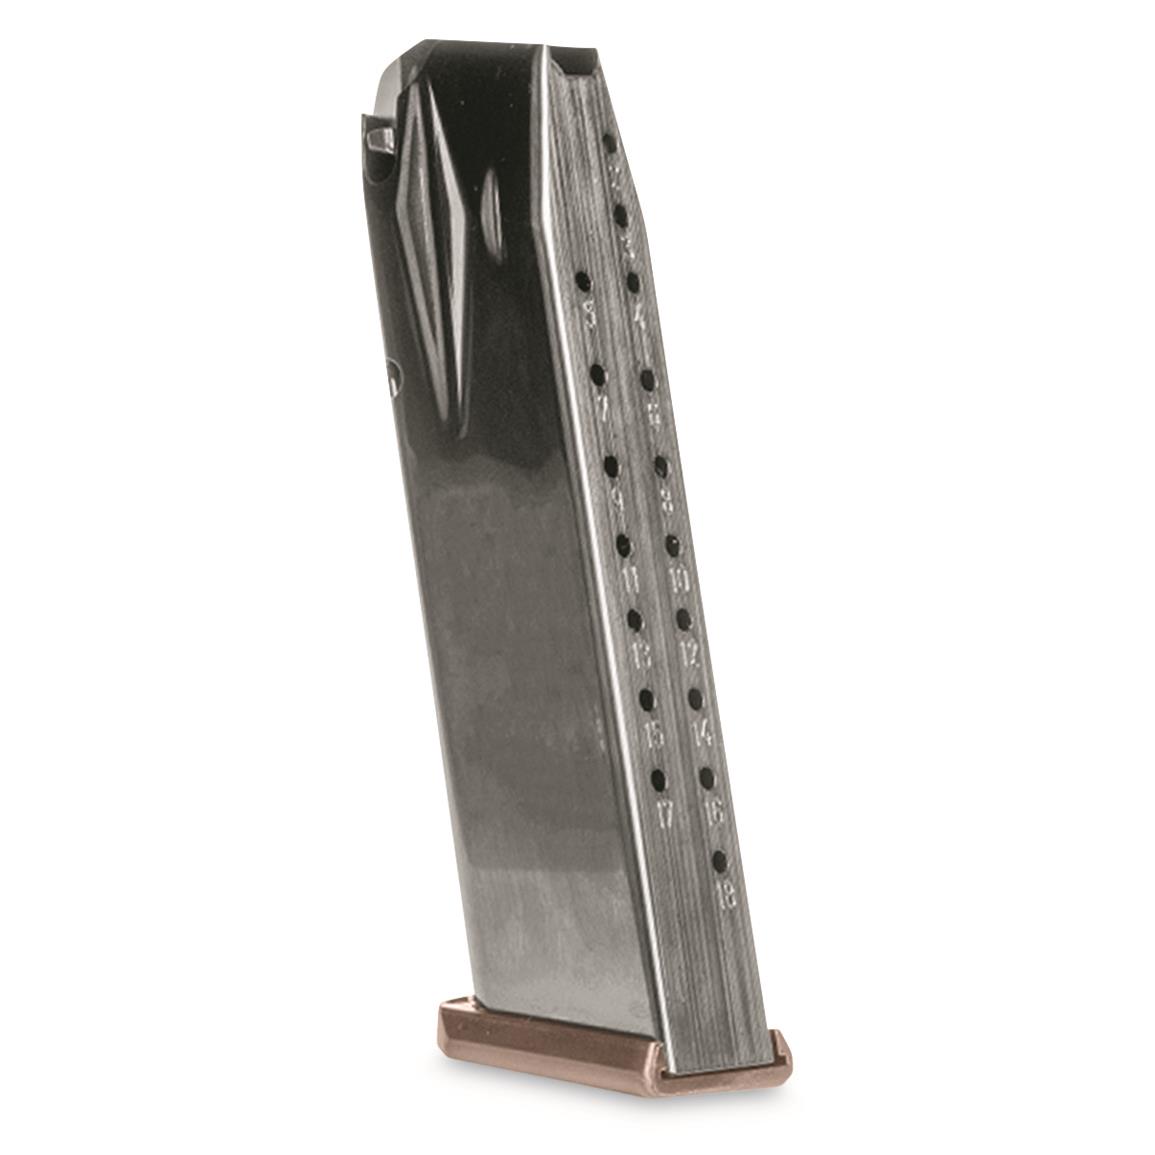 Canik TP9 Magazine with FDE Baseplate, 18 Rounds, Tenifer